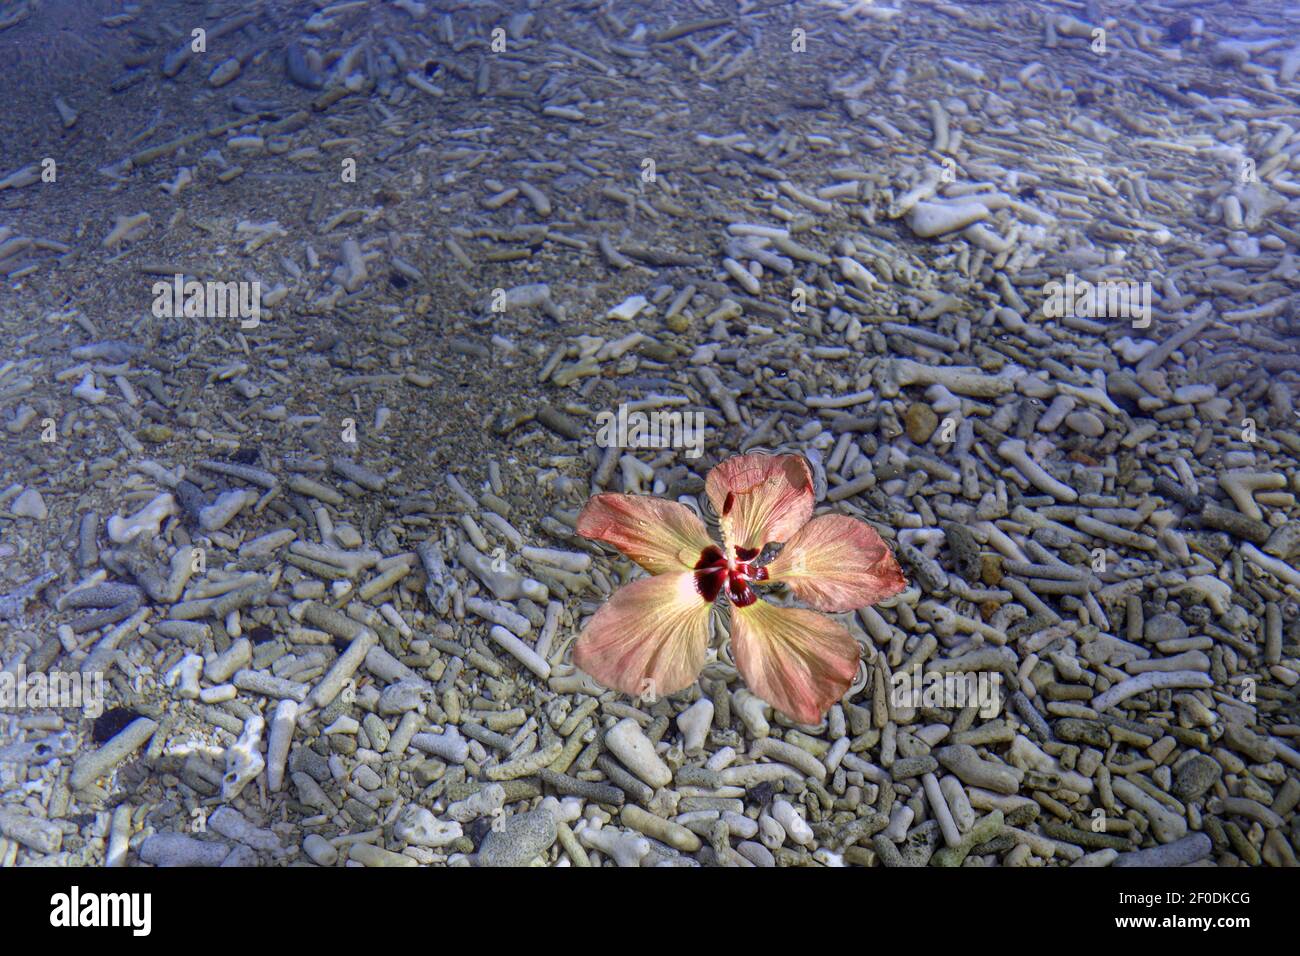 Flower of native cottonwood hibiscus floating on perfectly clear shallow water, Fitzroy Island, Great Barrier Reef, near Cairns, Queensland, Australia Stock Photo